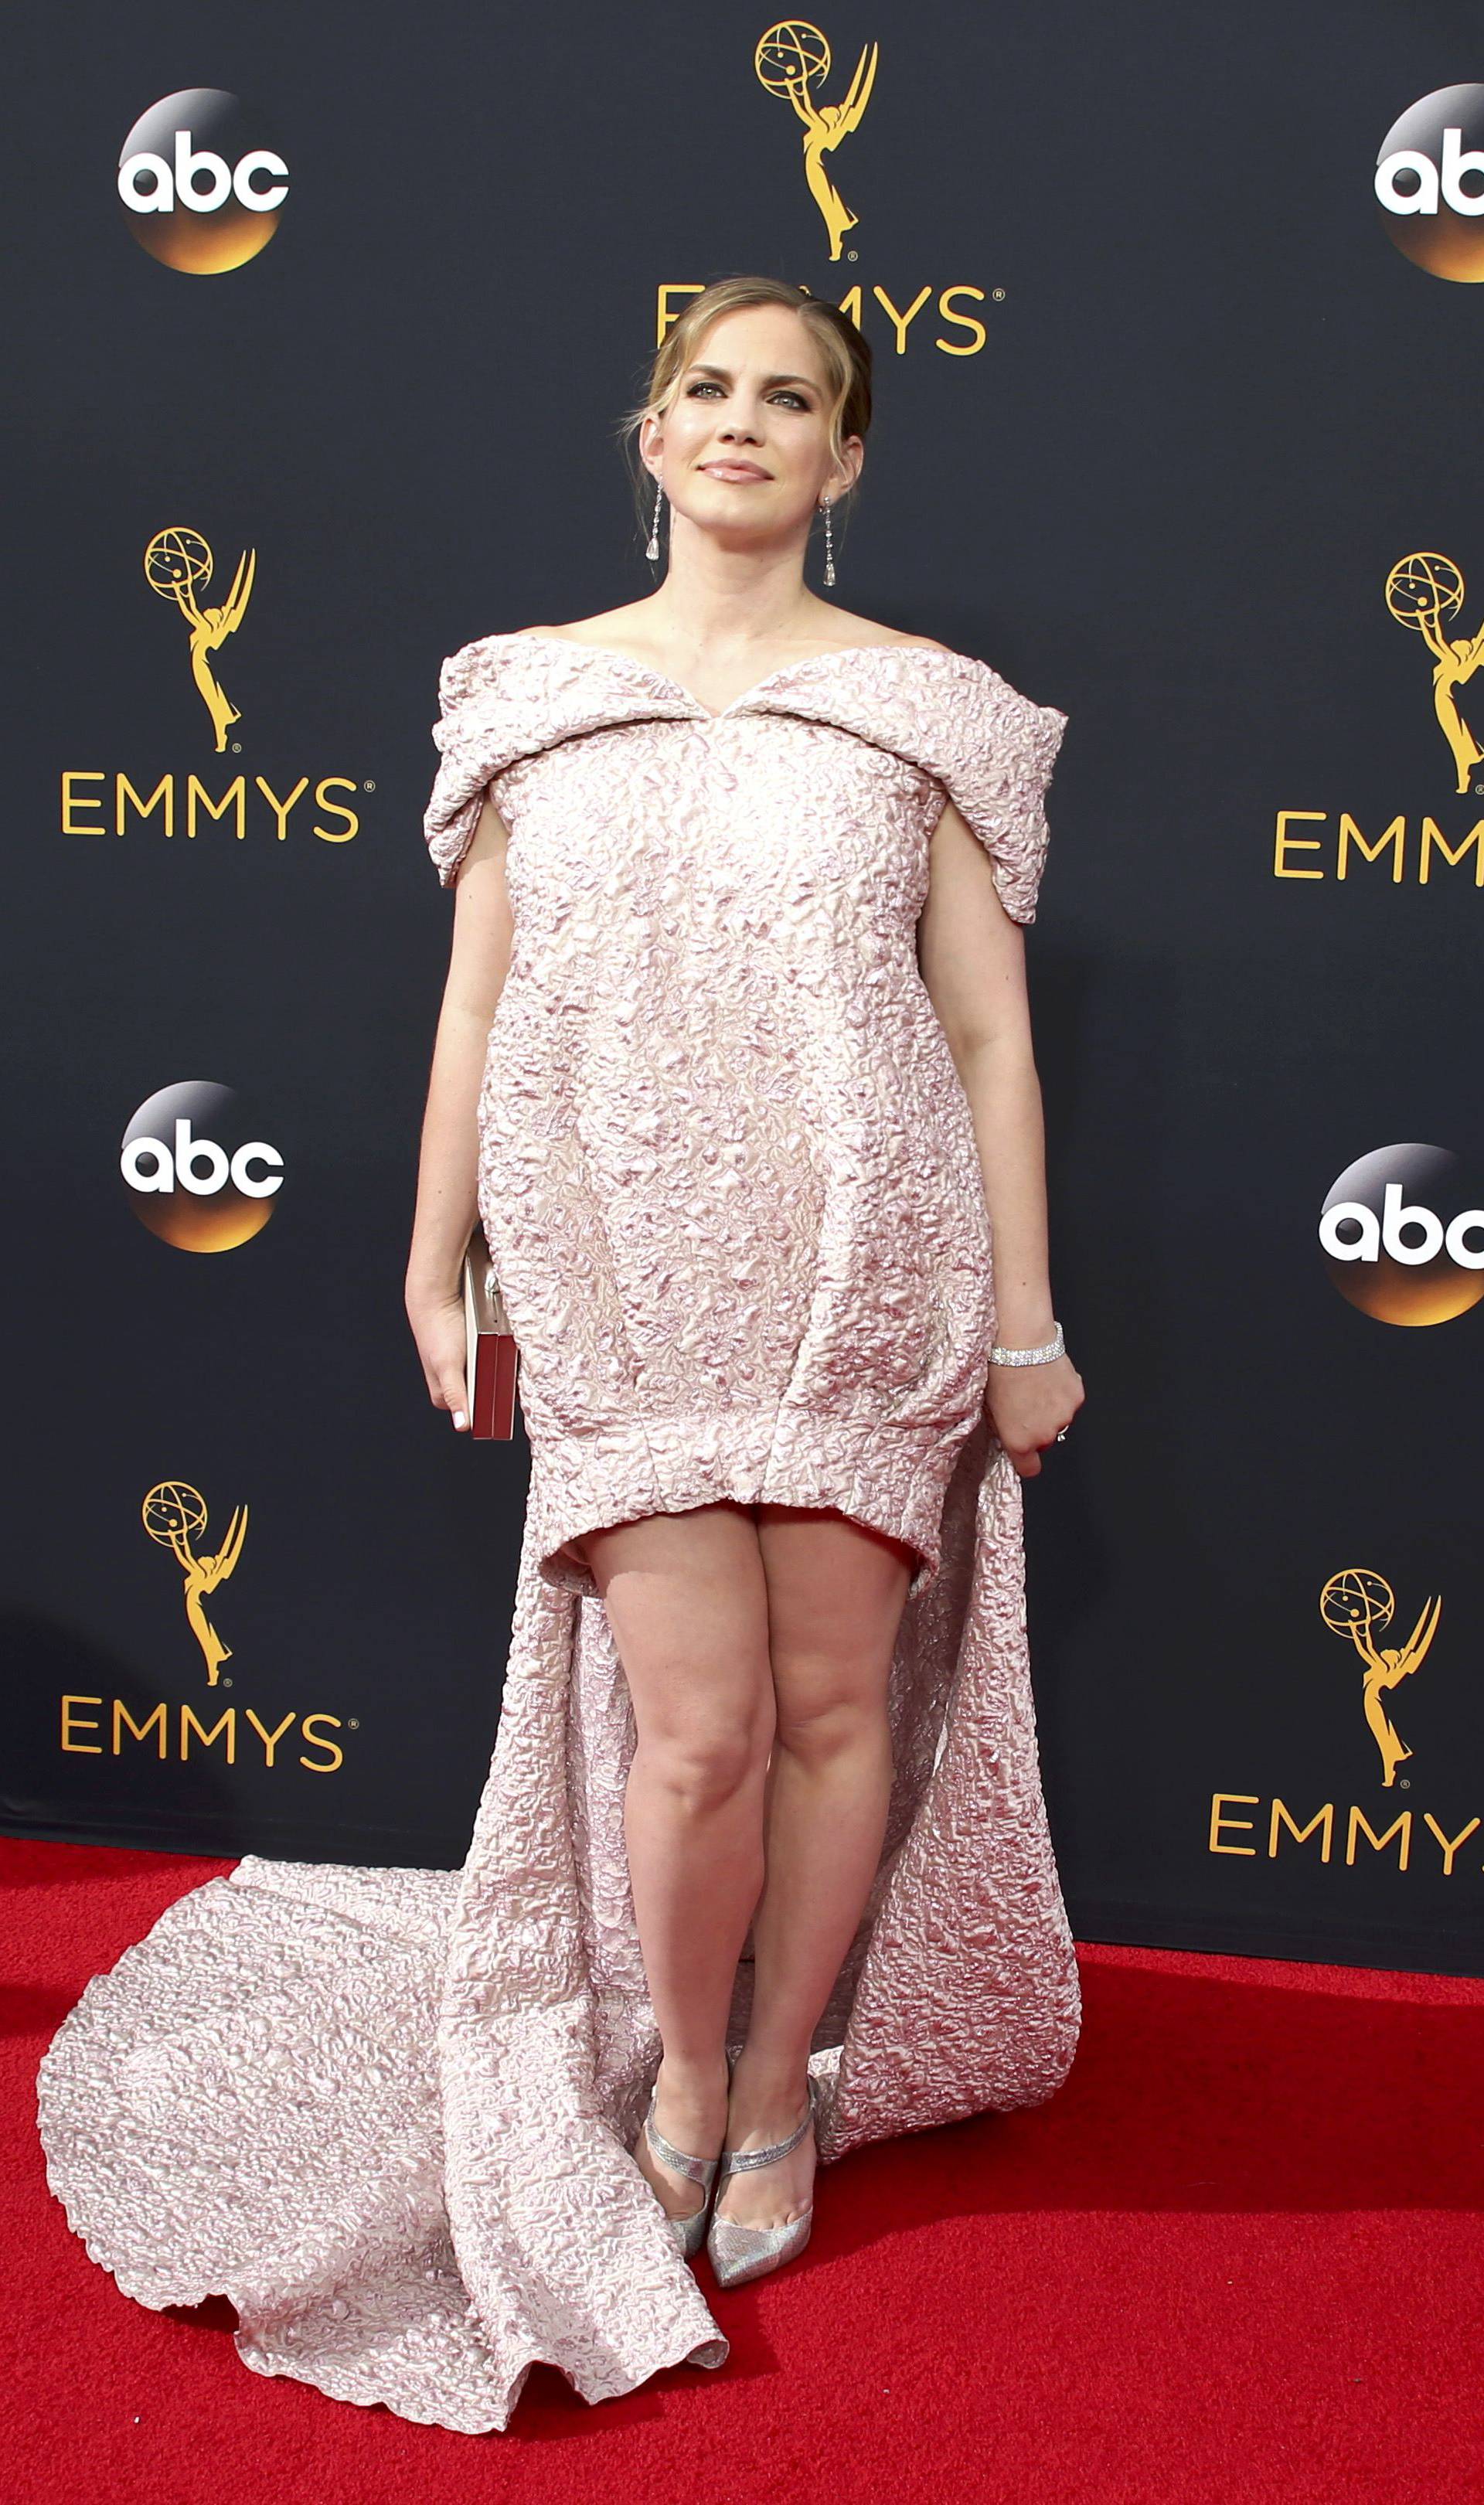 Actress Anna Chlumsky arrives at the 68th Primetime Emmy Awards in Los Angeles